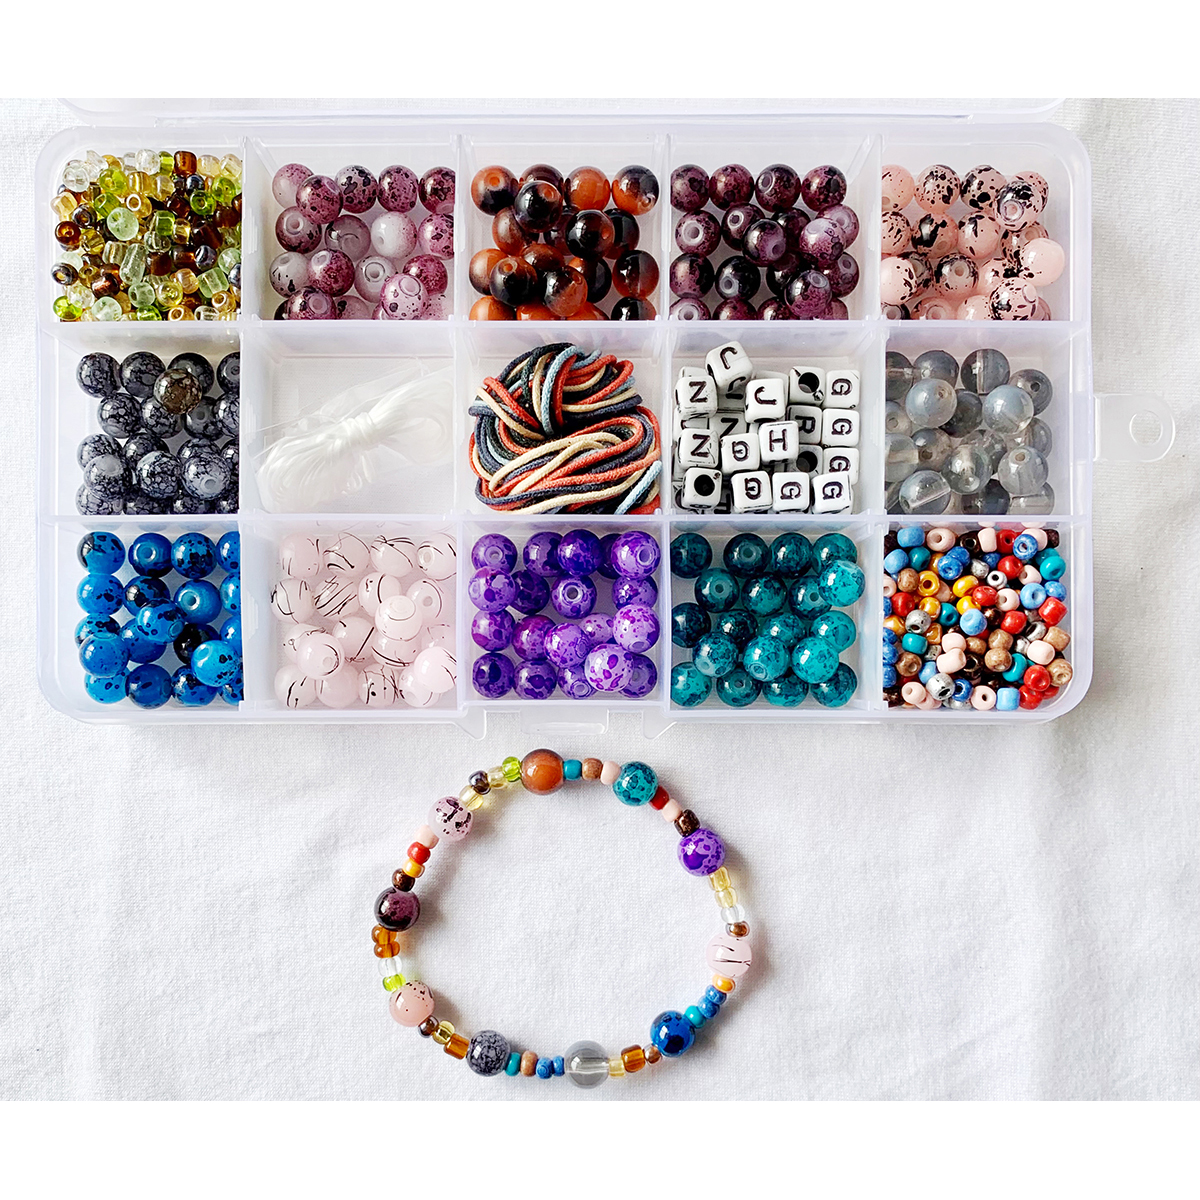 Marbleized and Patina texture Stone Glass Beads Kit